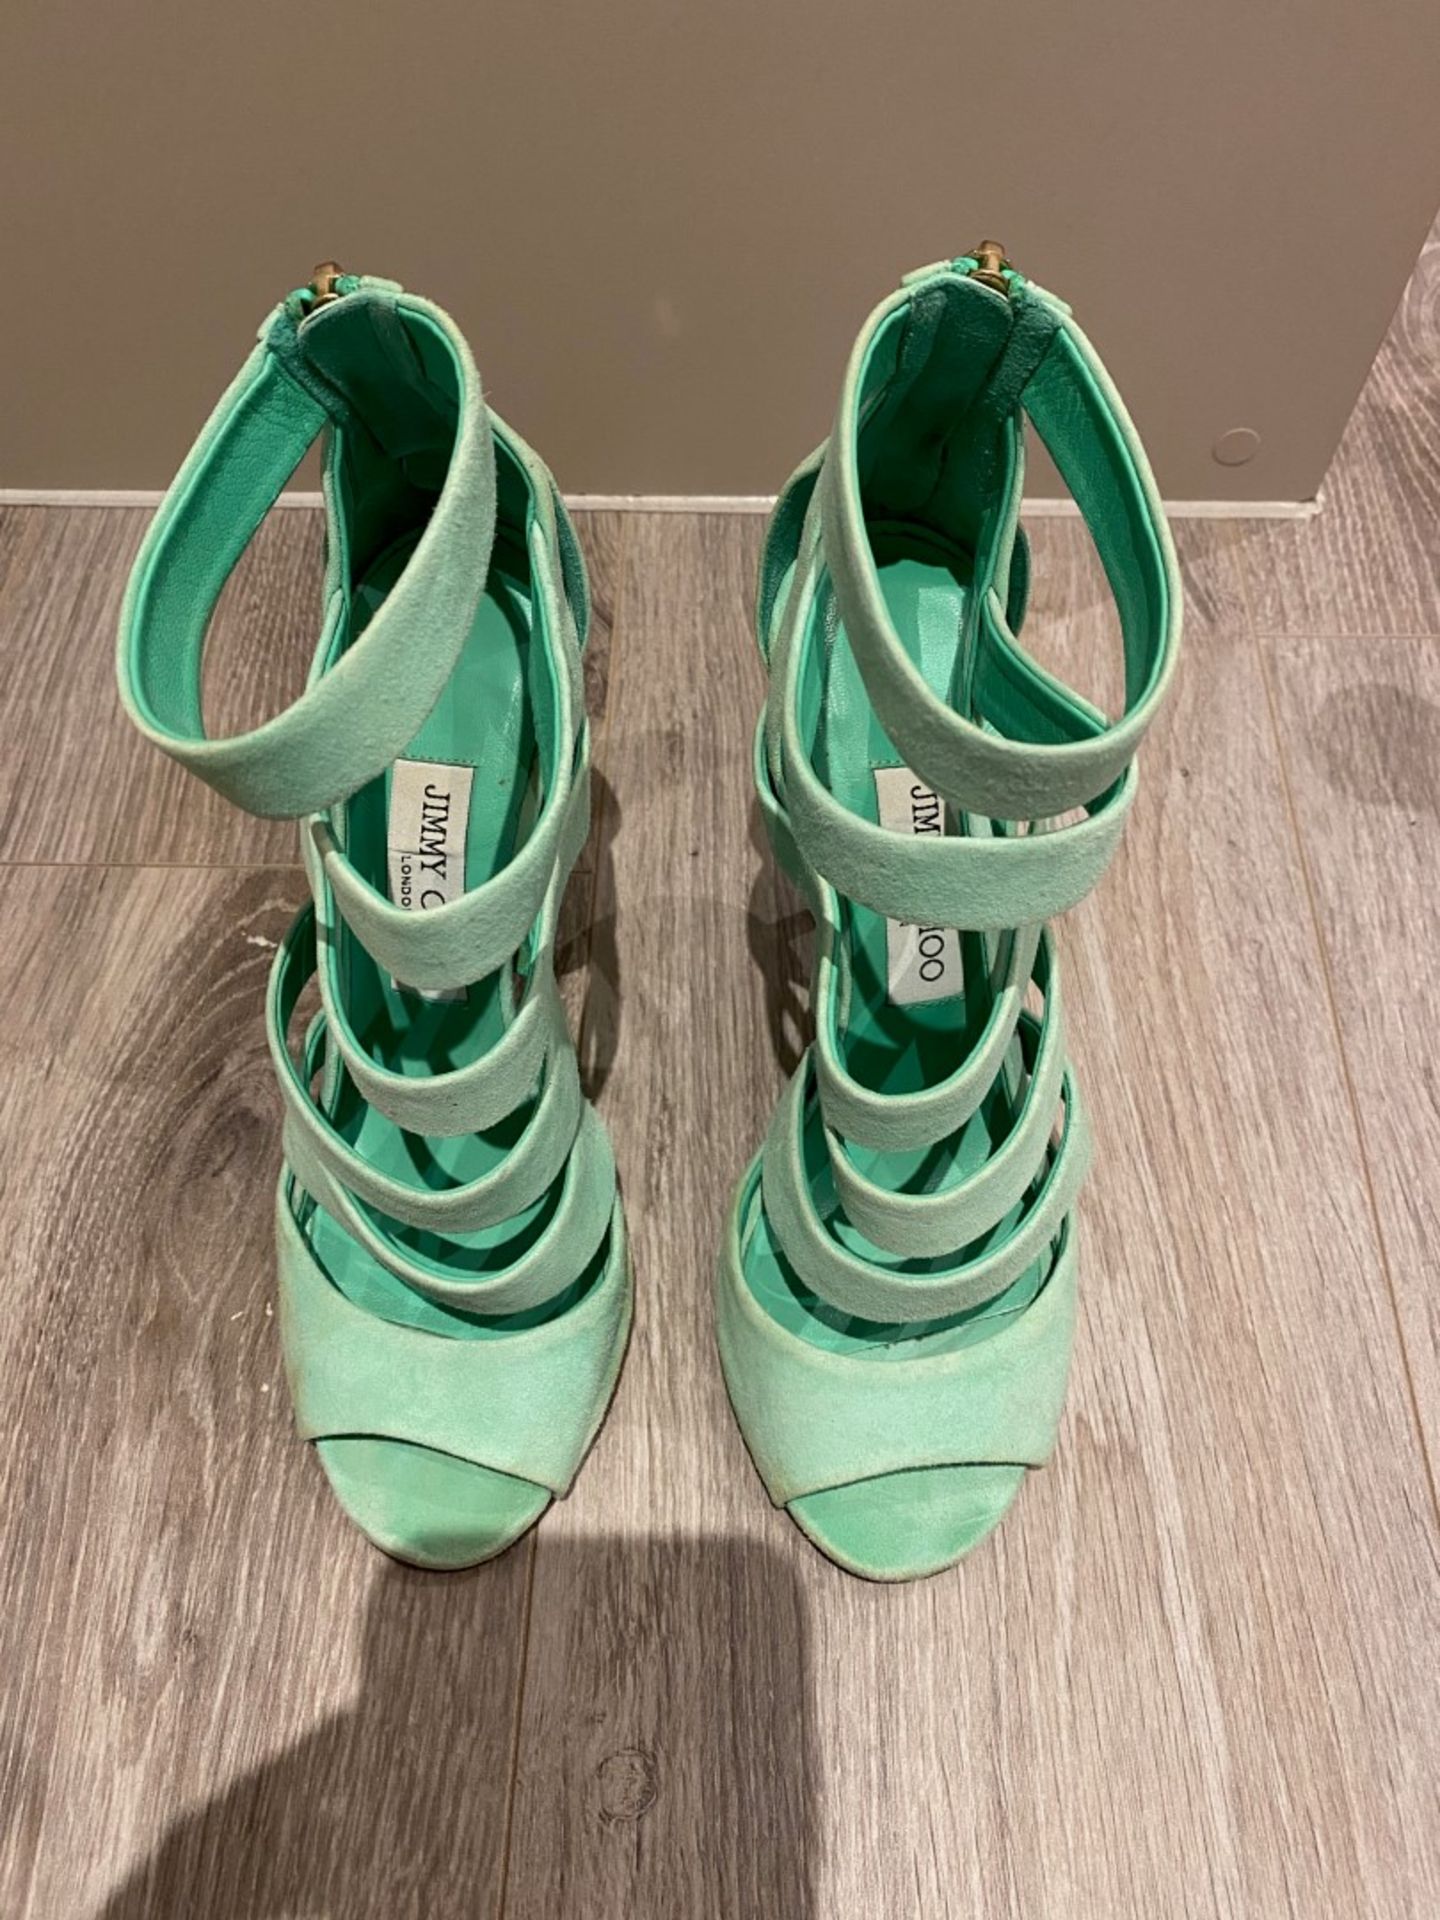 1 x Pair Of Genuine Jimmy Choo High Heel Shoes In Mint Green - Size: 36 - Preowned in Worn Condition - Image 6 of 6